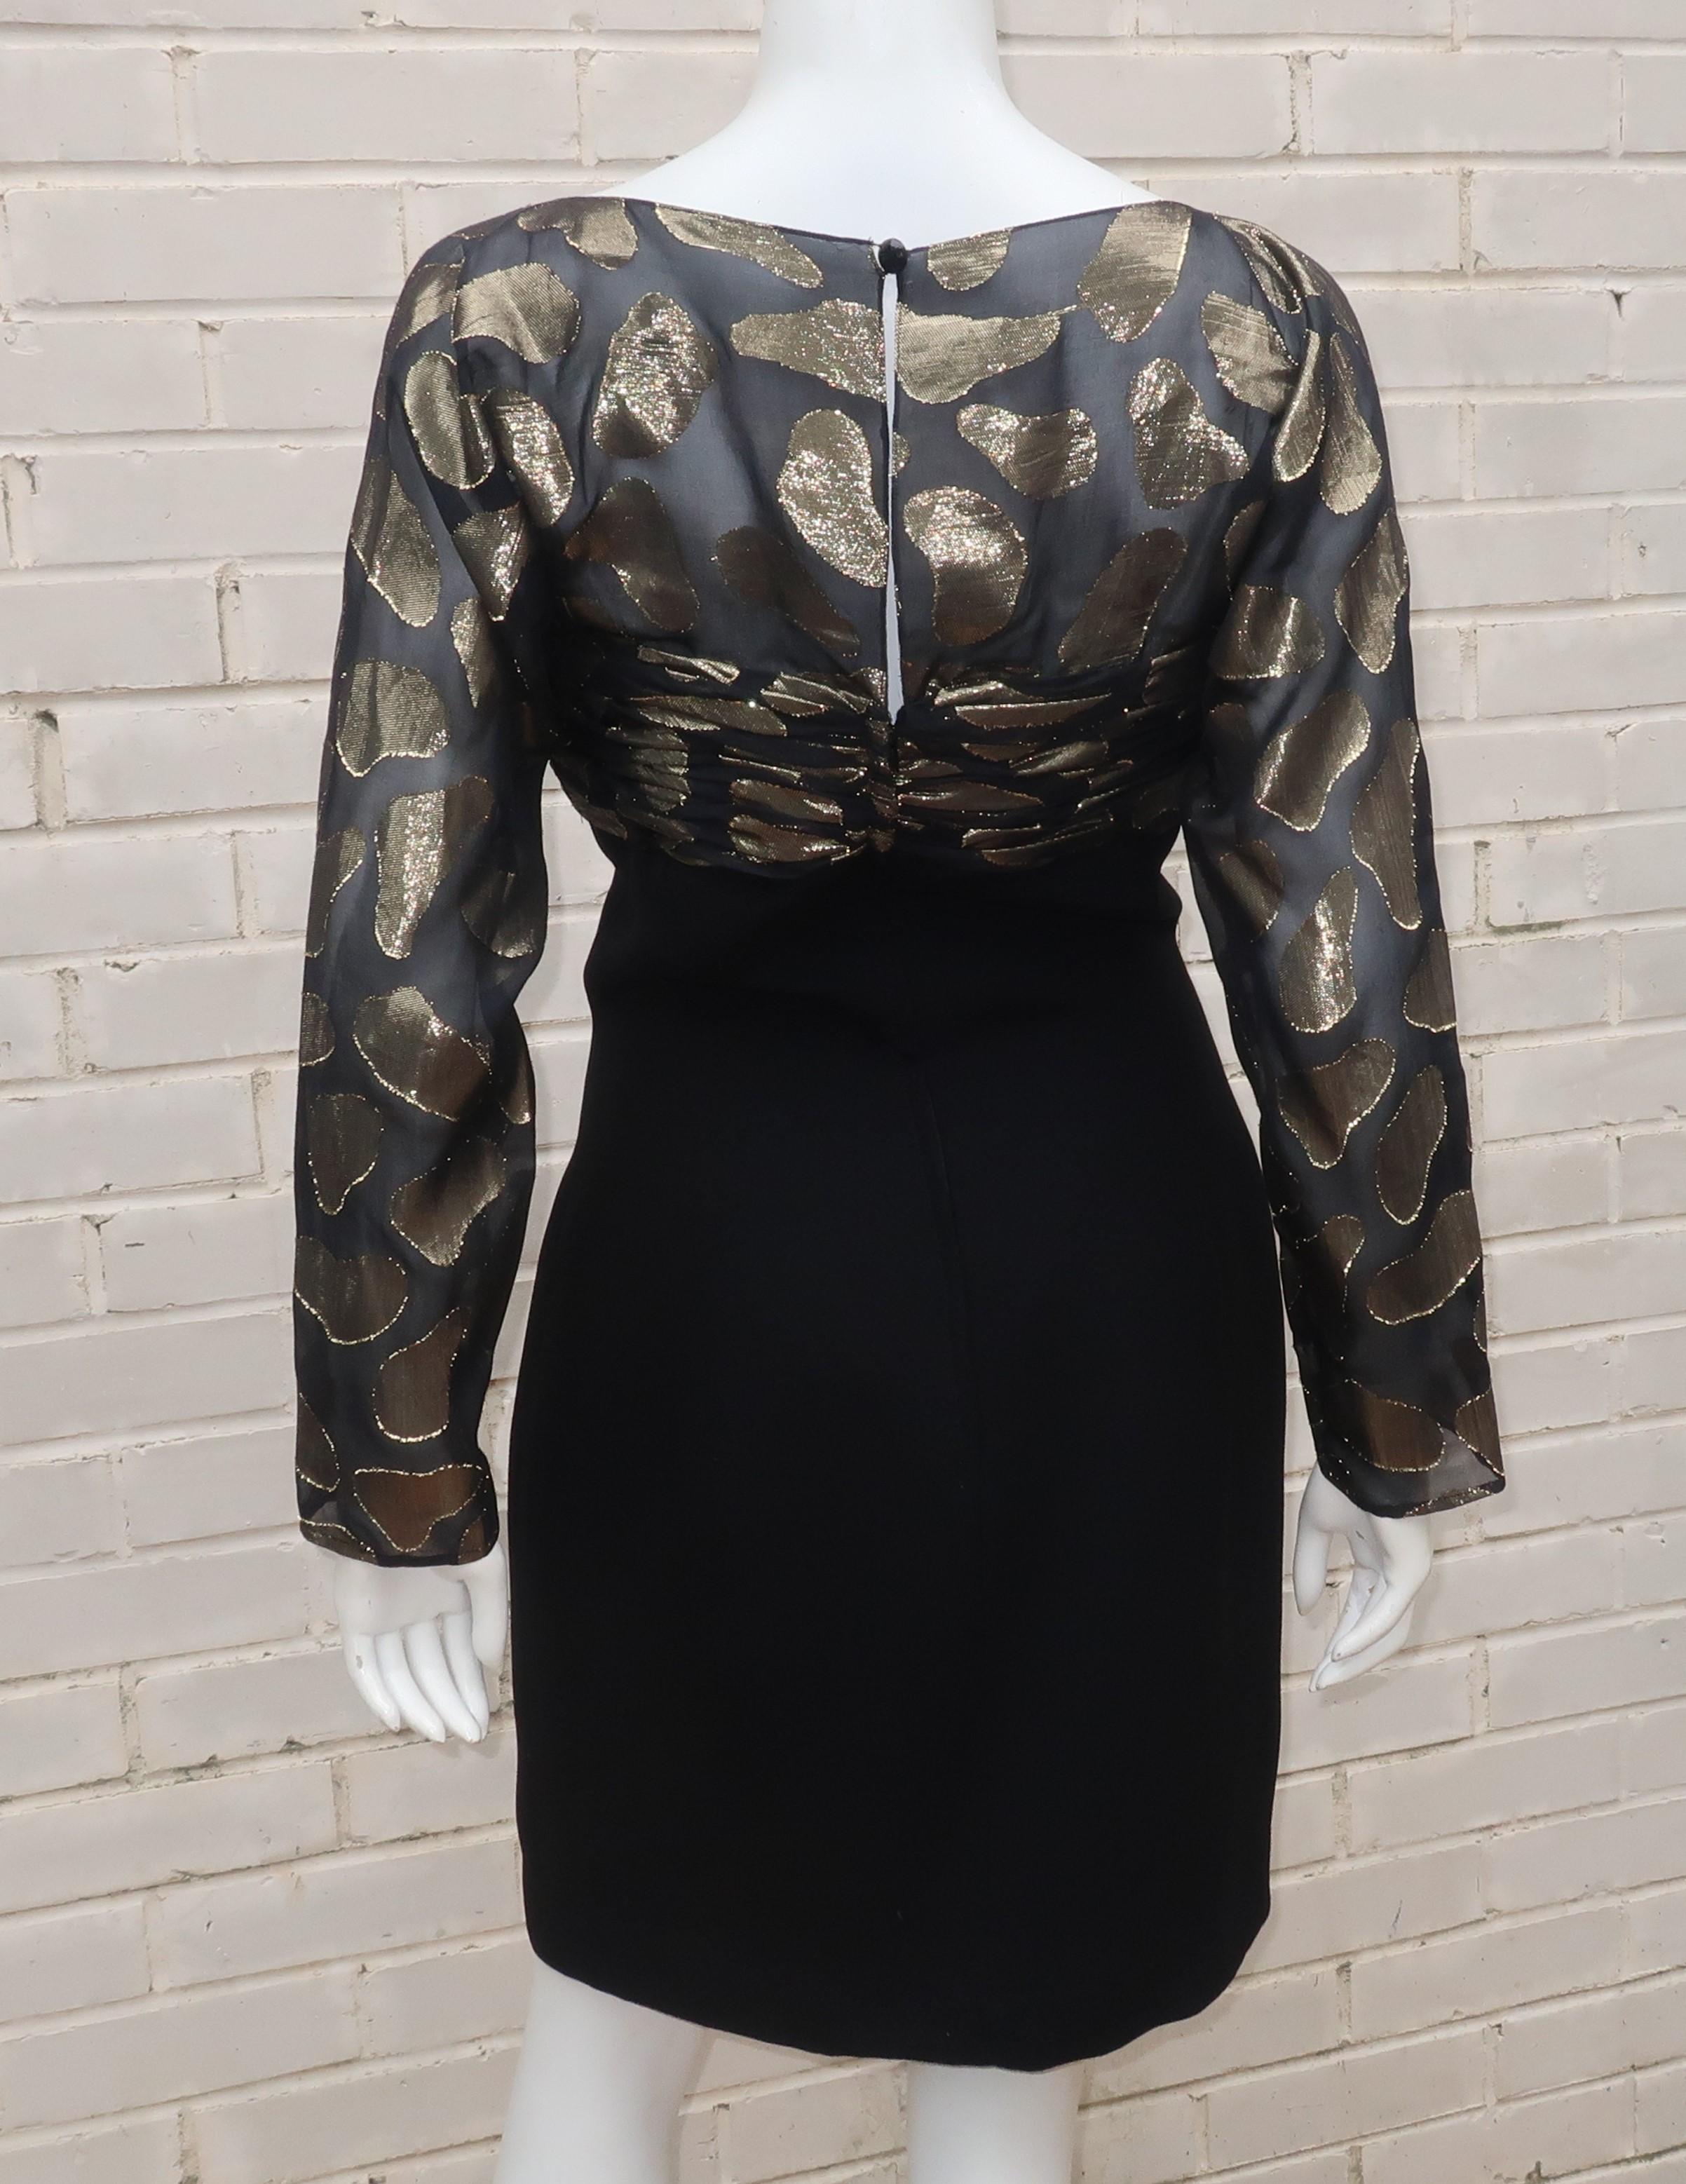 Snooty Hooty Black Crepe & Gold Lamé Cocktail Dress, C.1980 For Sale 2